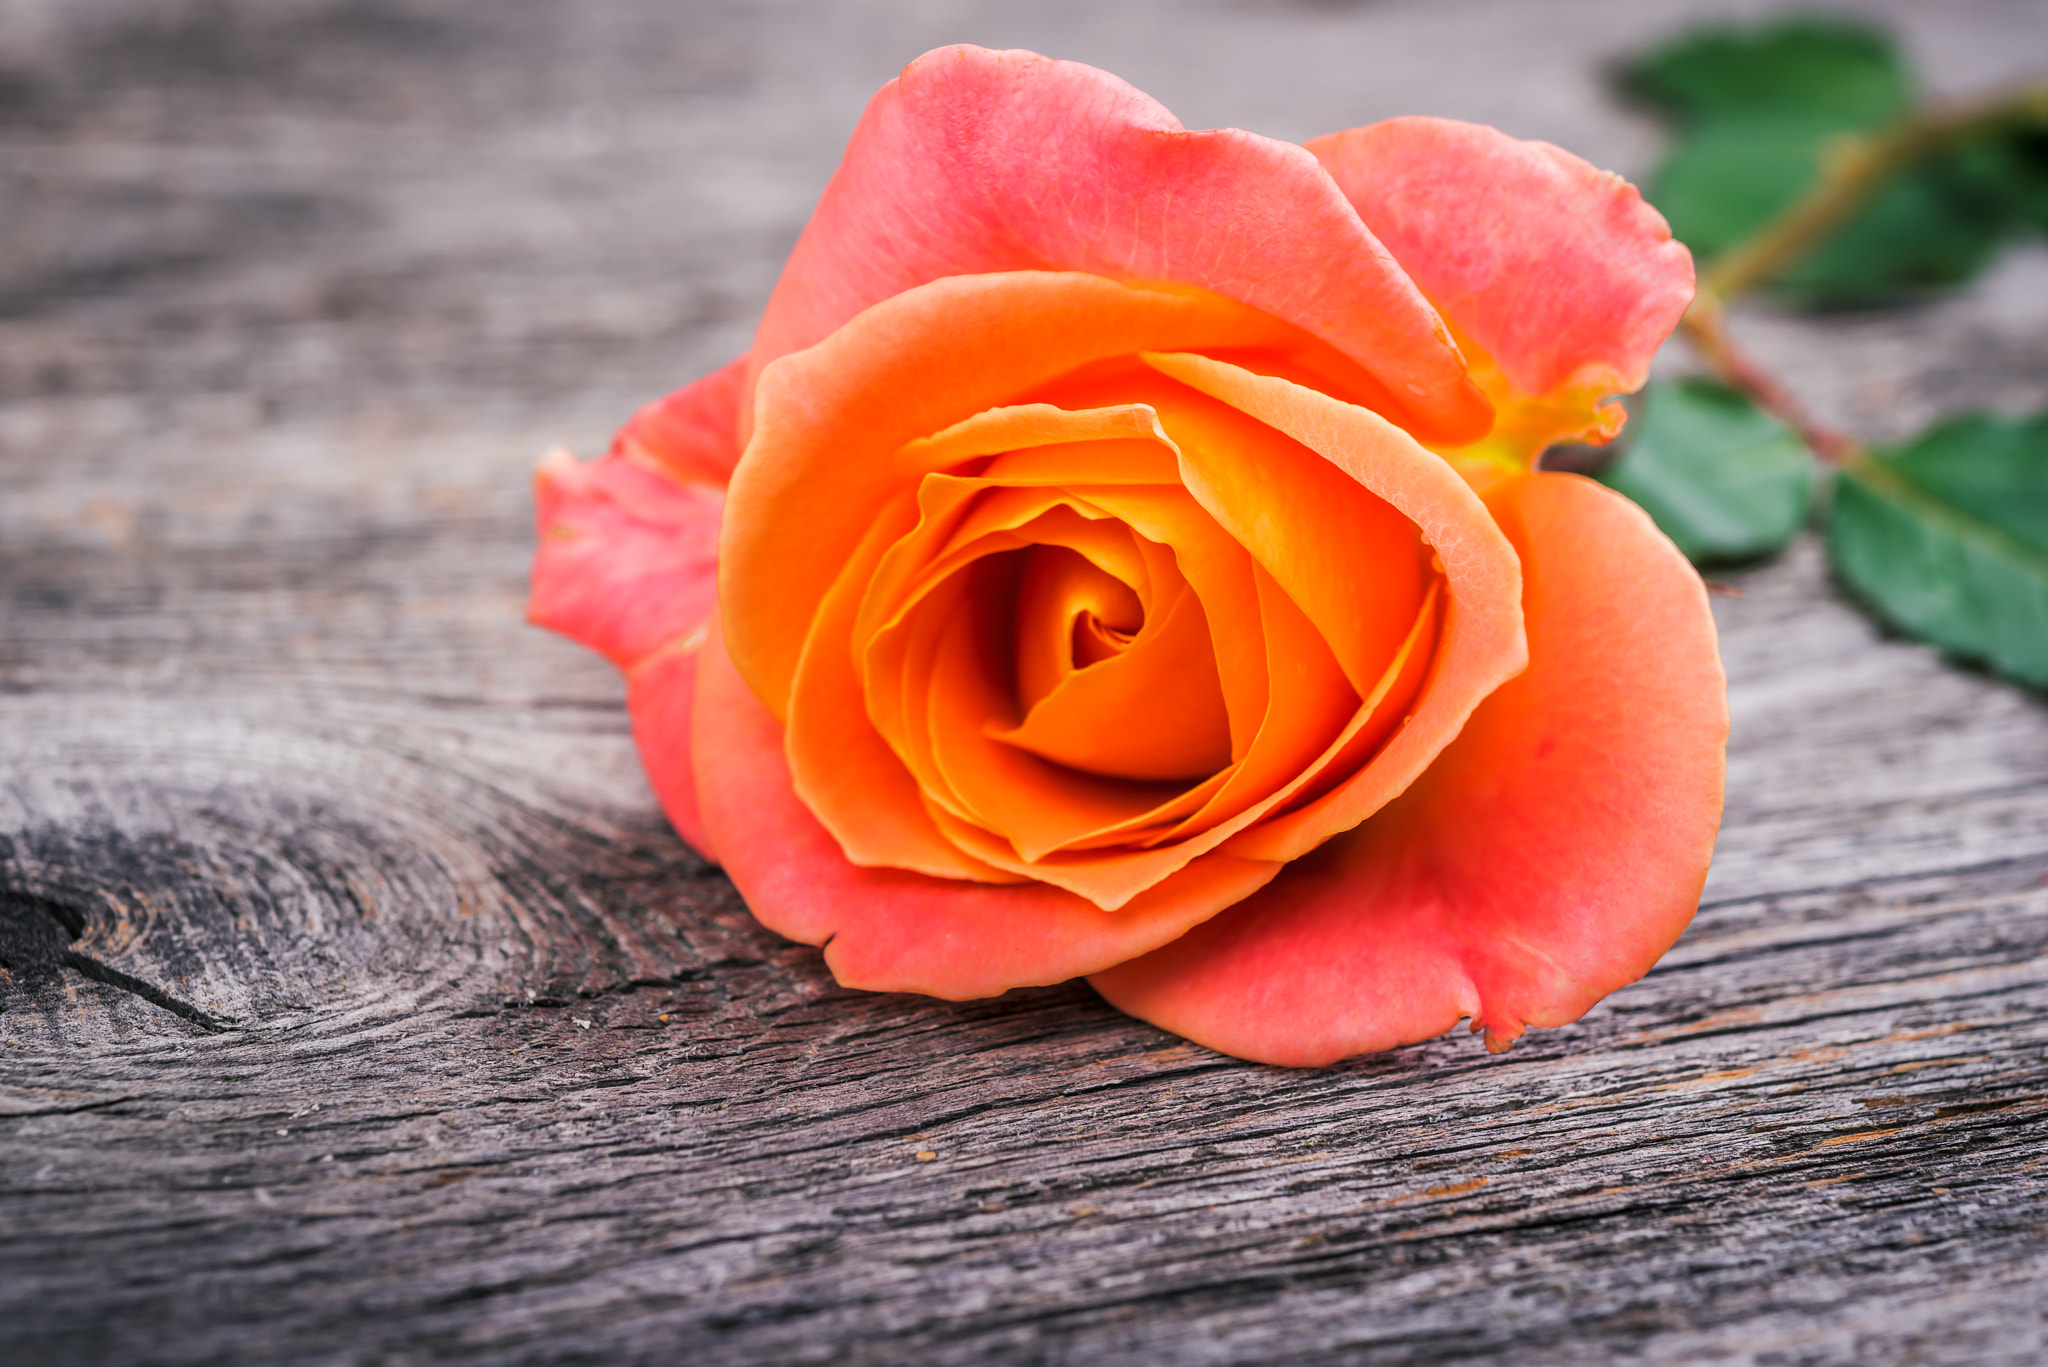 Free photo Orange rose on a wooden table